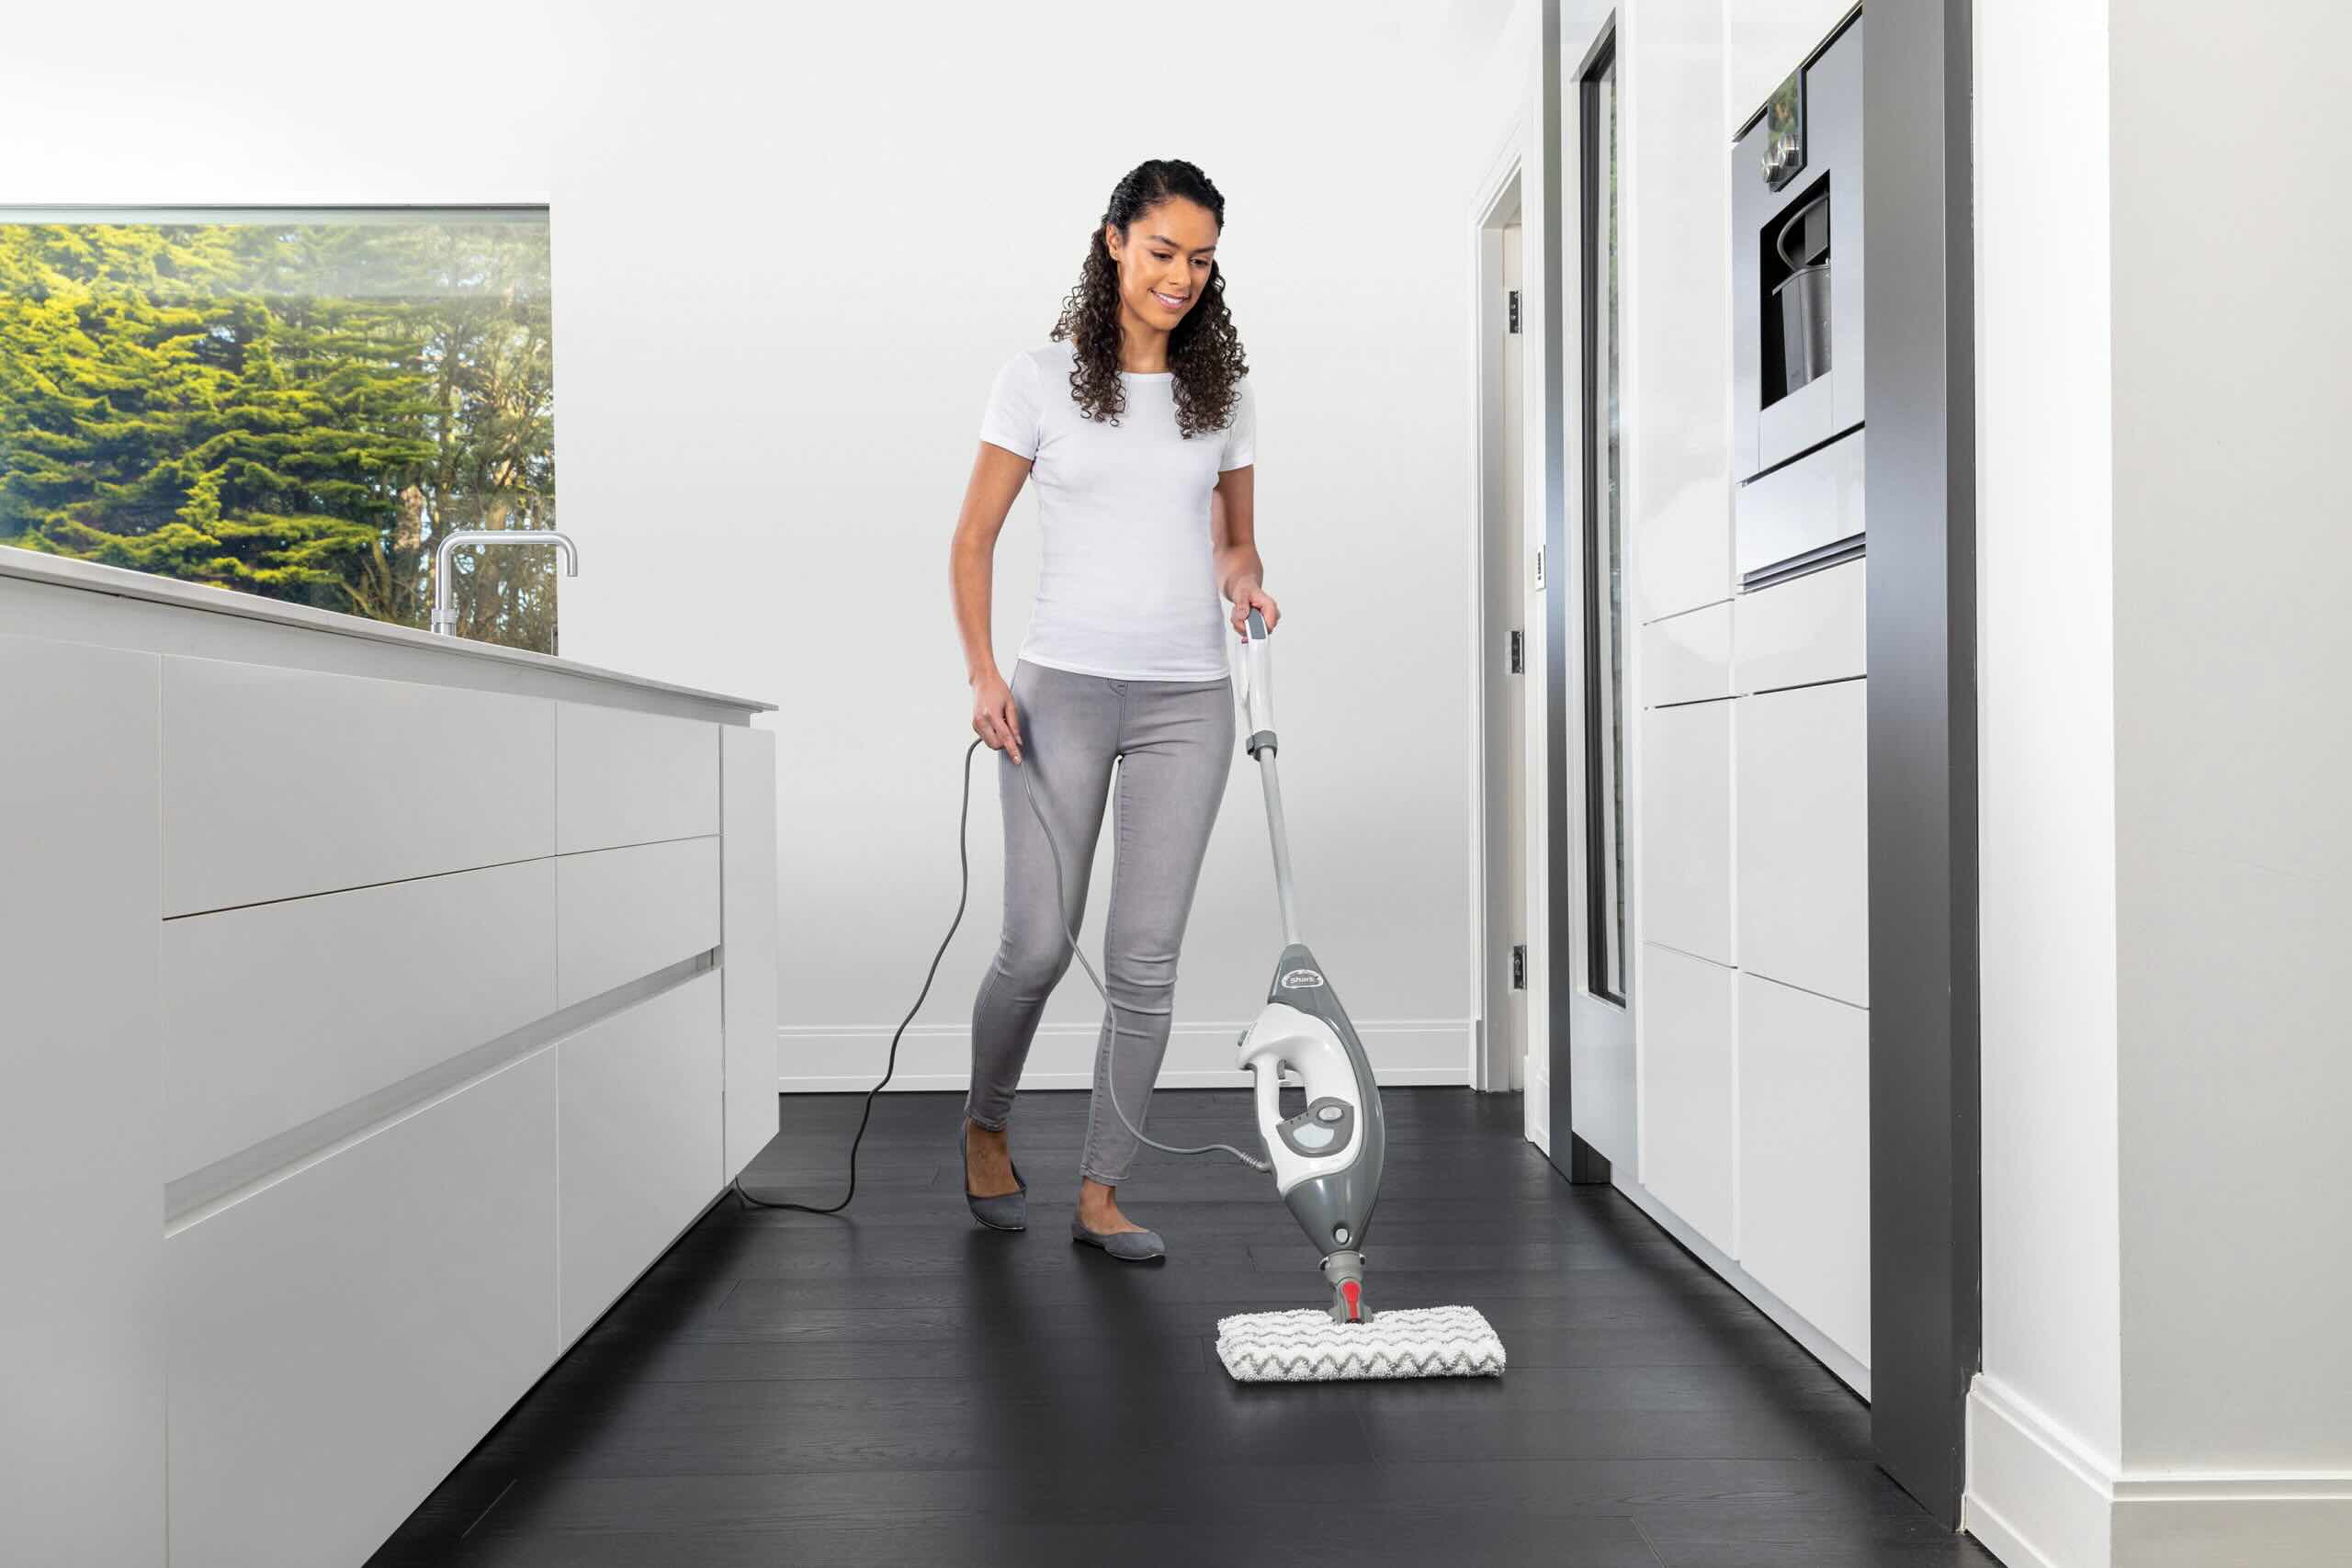 Best steam mops 2023: The top steam mops for hard floors